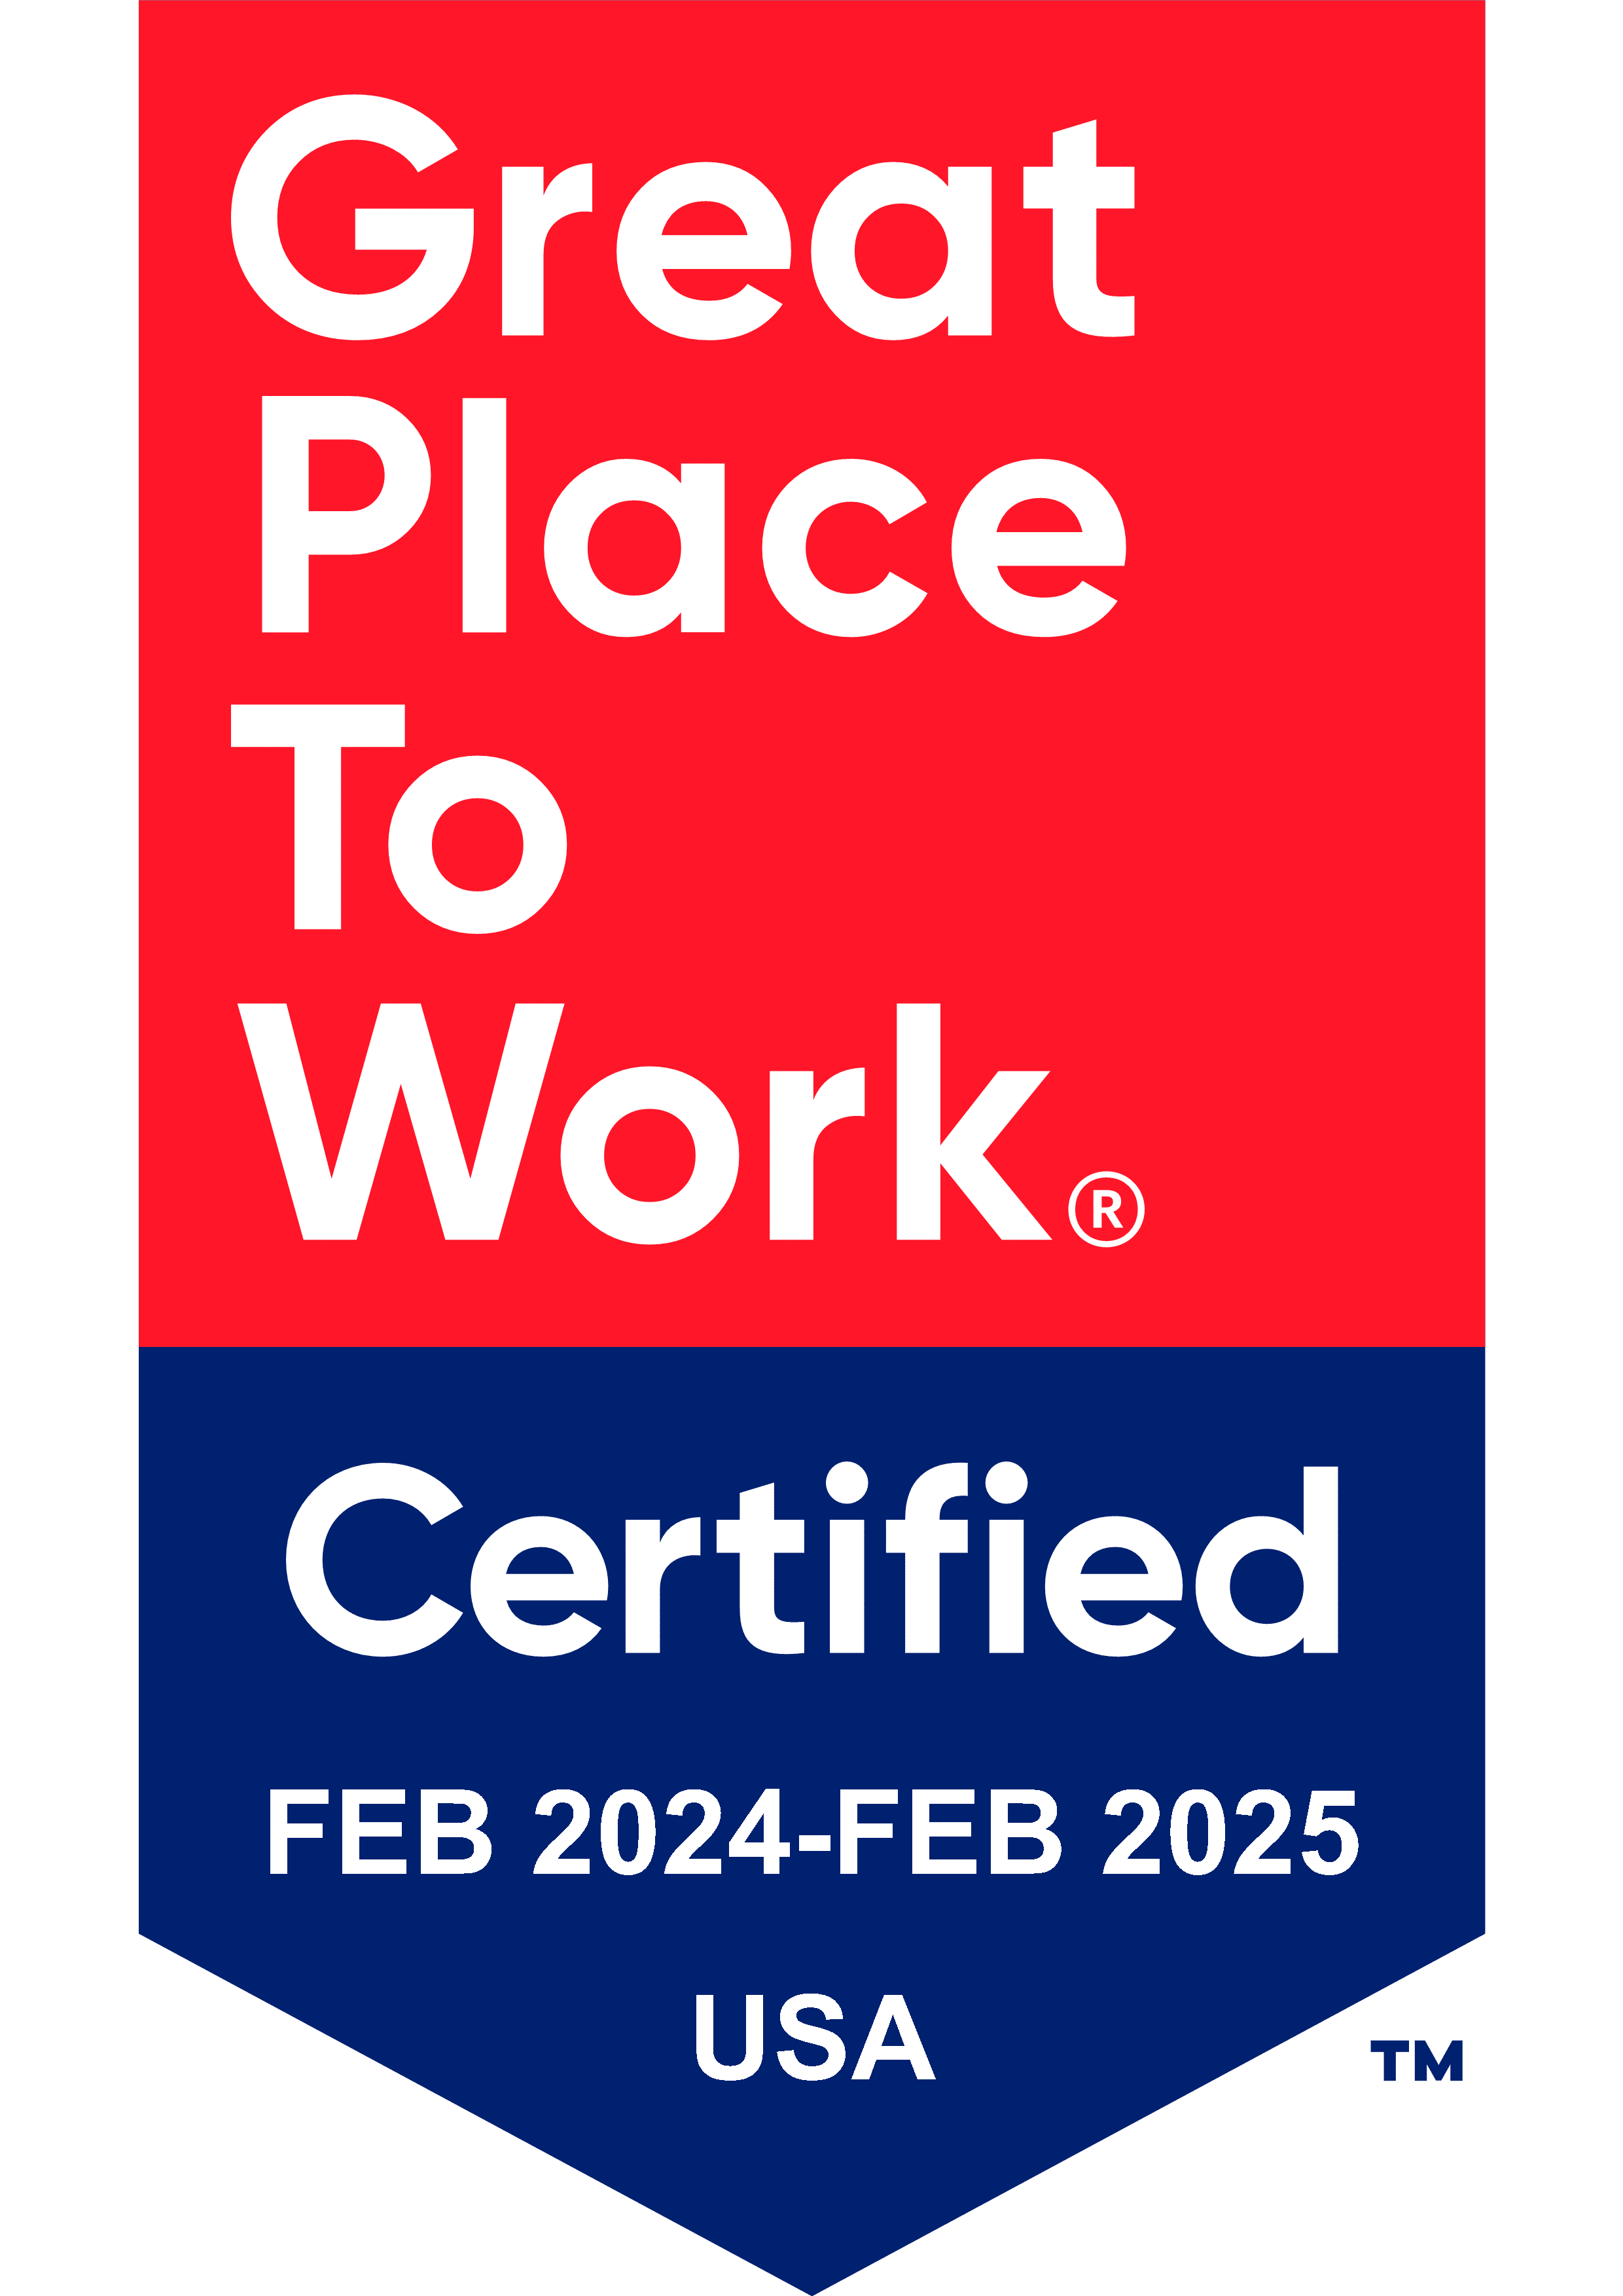 Great Place To Work Certification Badge - Feb 2024-Feb 2025 USA